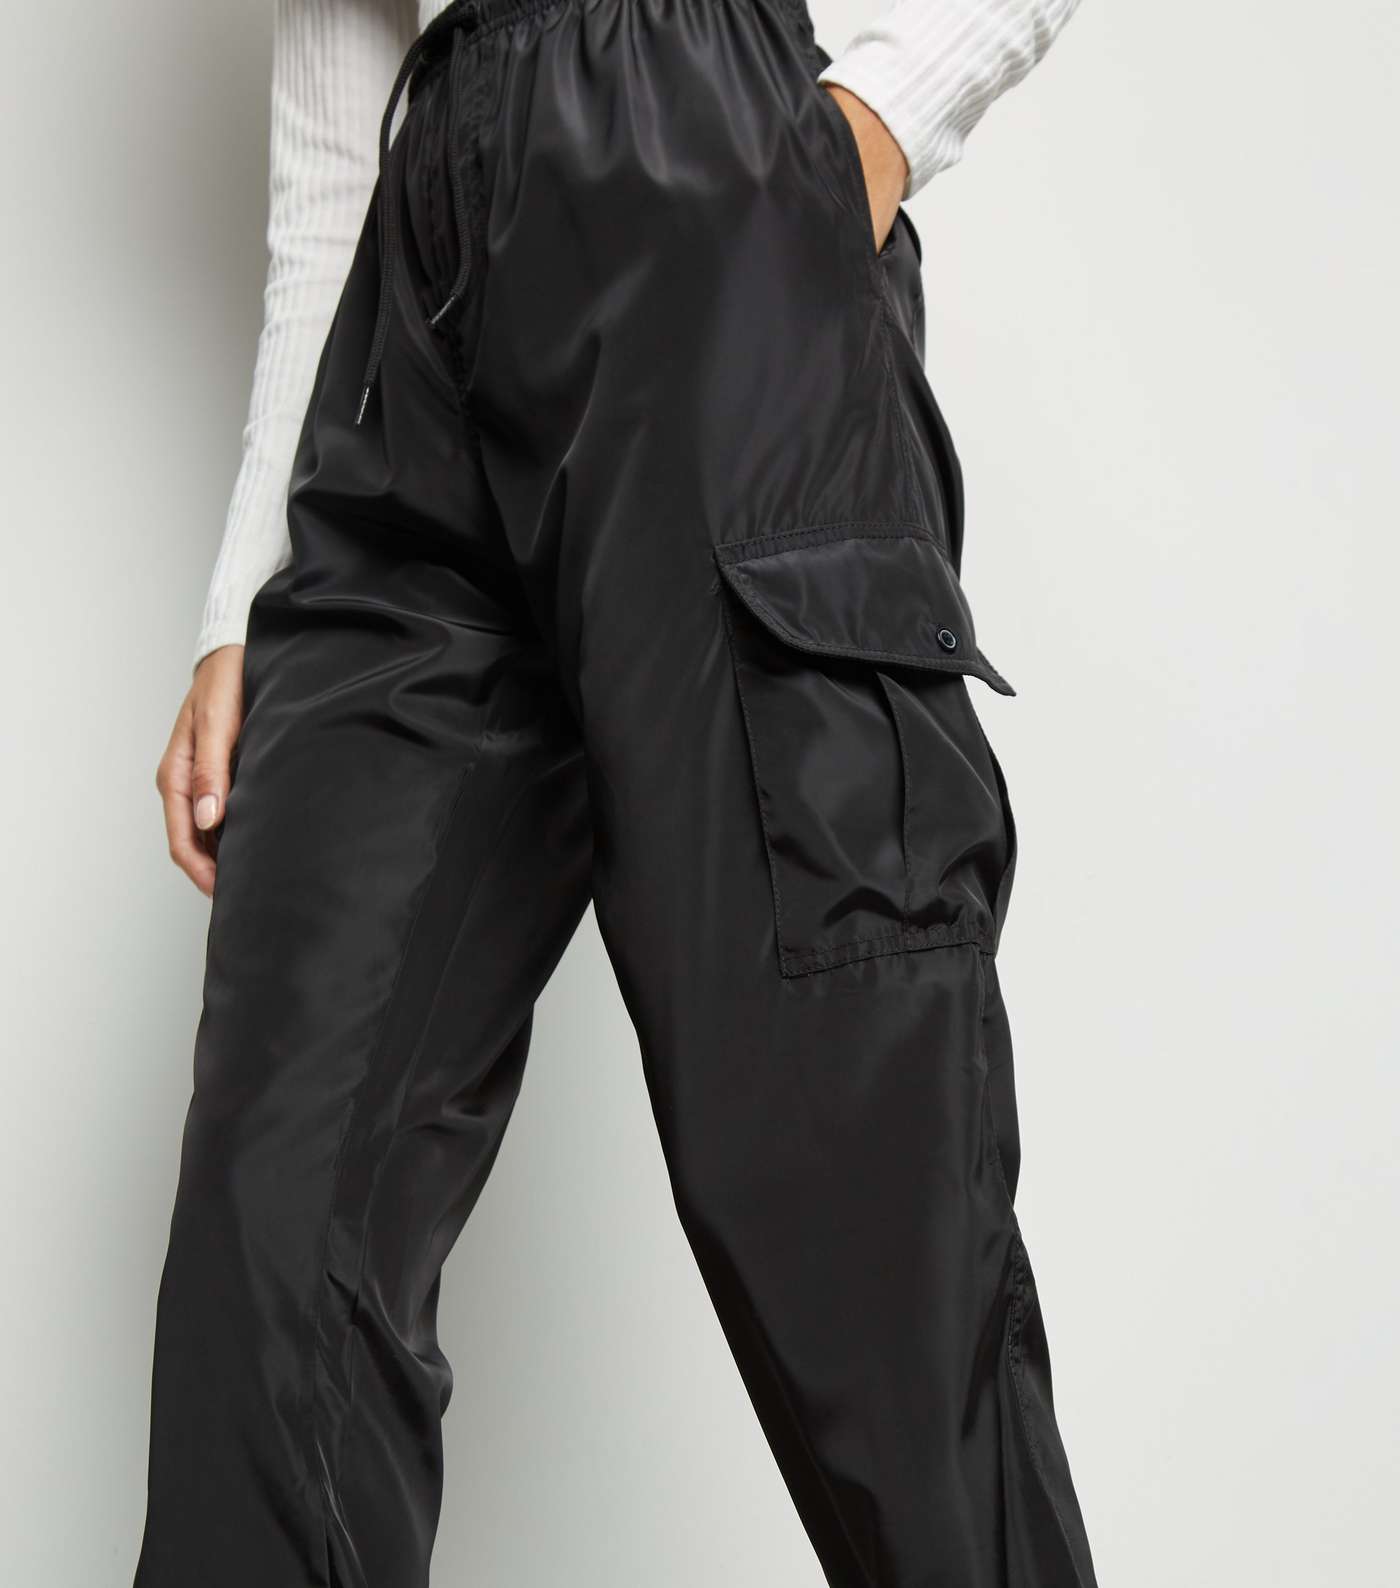 Cameo Rose Black Cuffed Utility Trousers Image 5